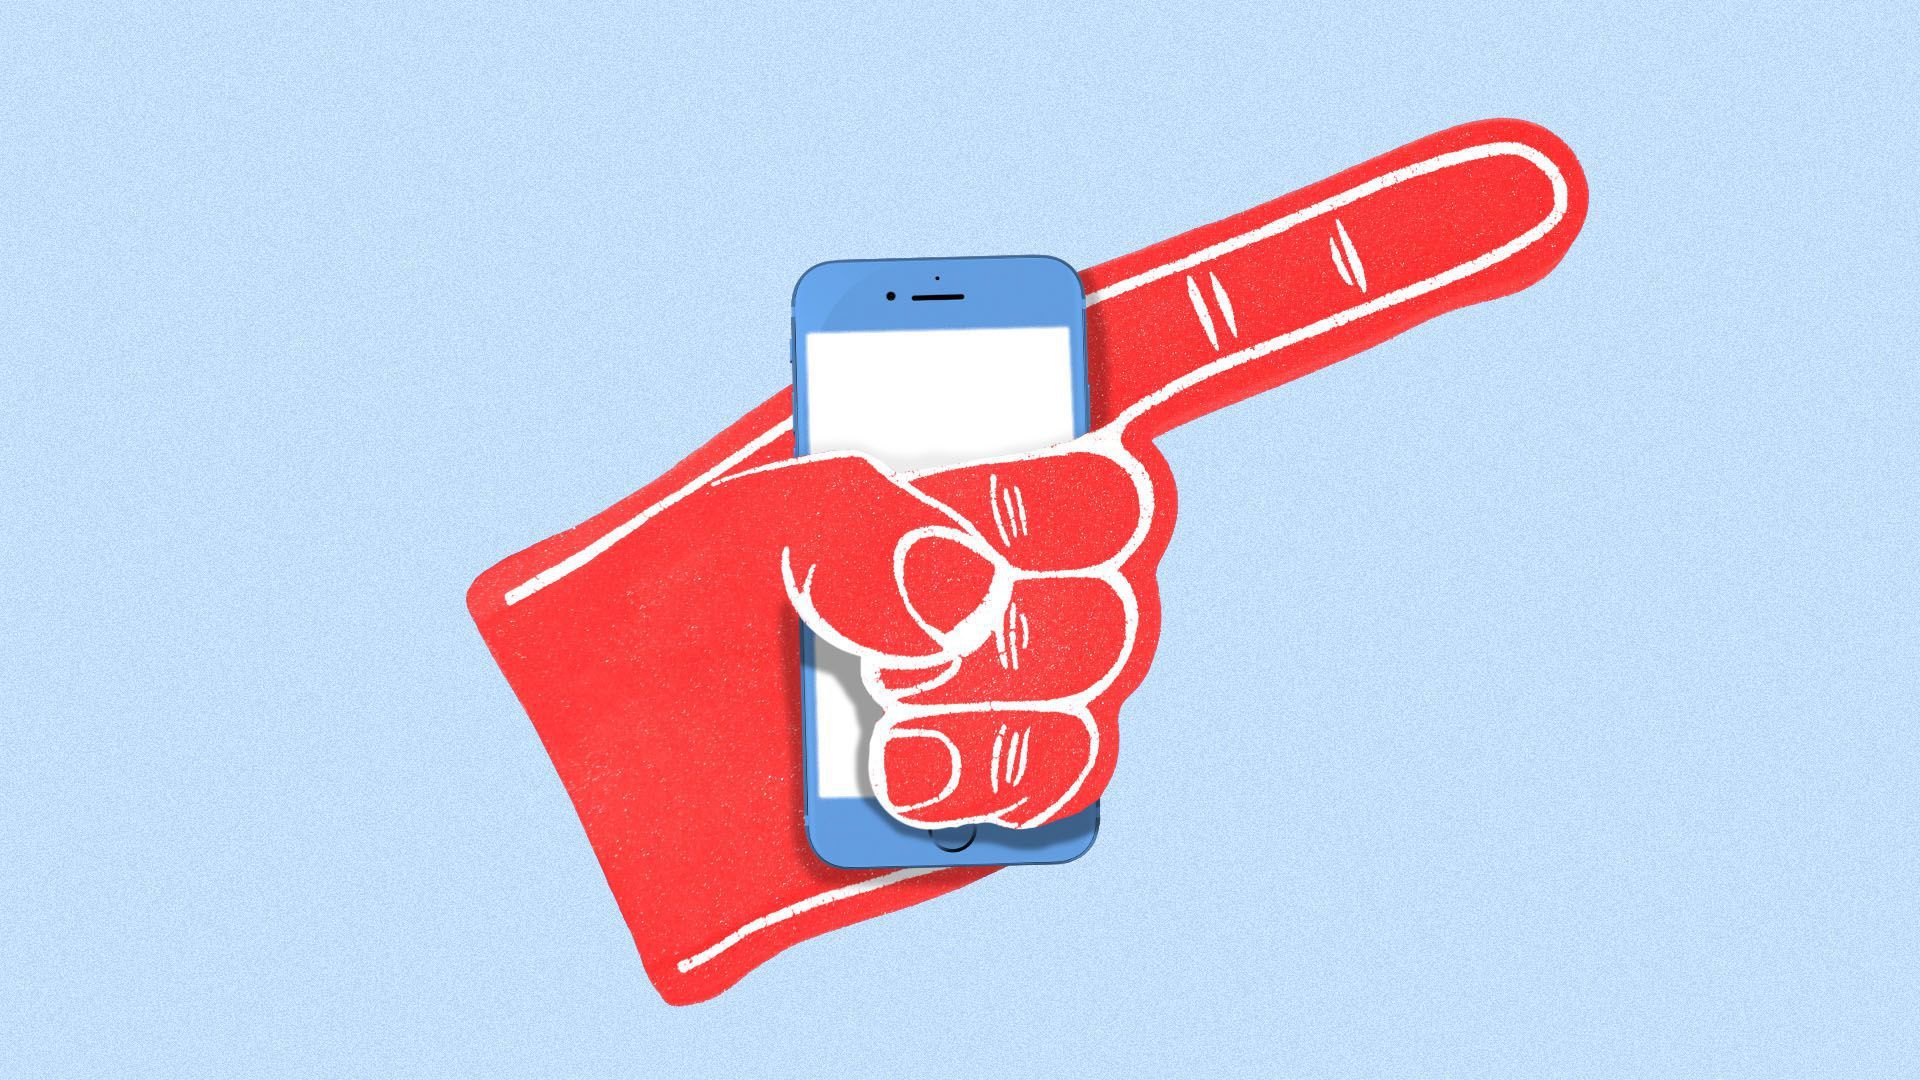 Illustration of a foam hand holding a mobile phone.